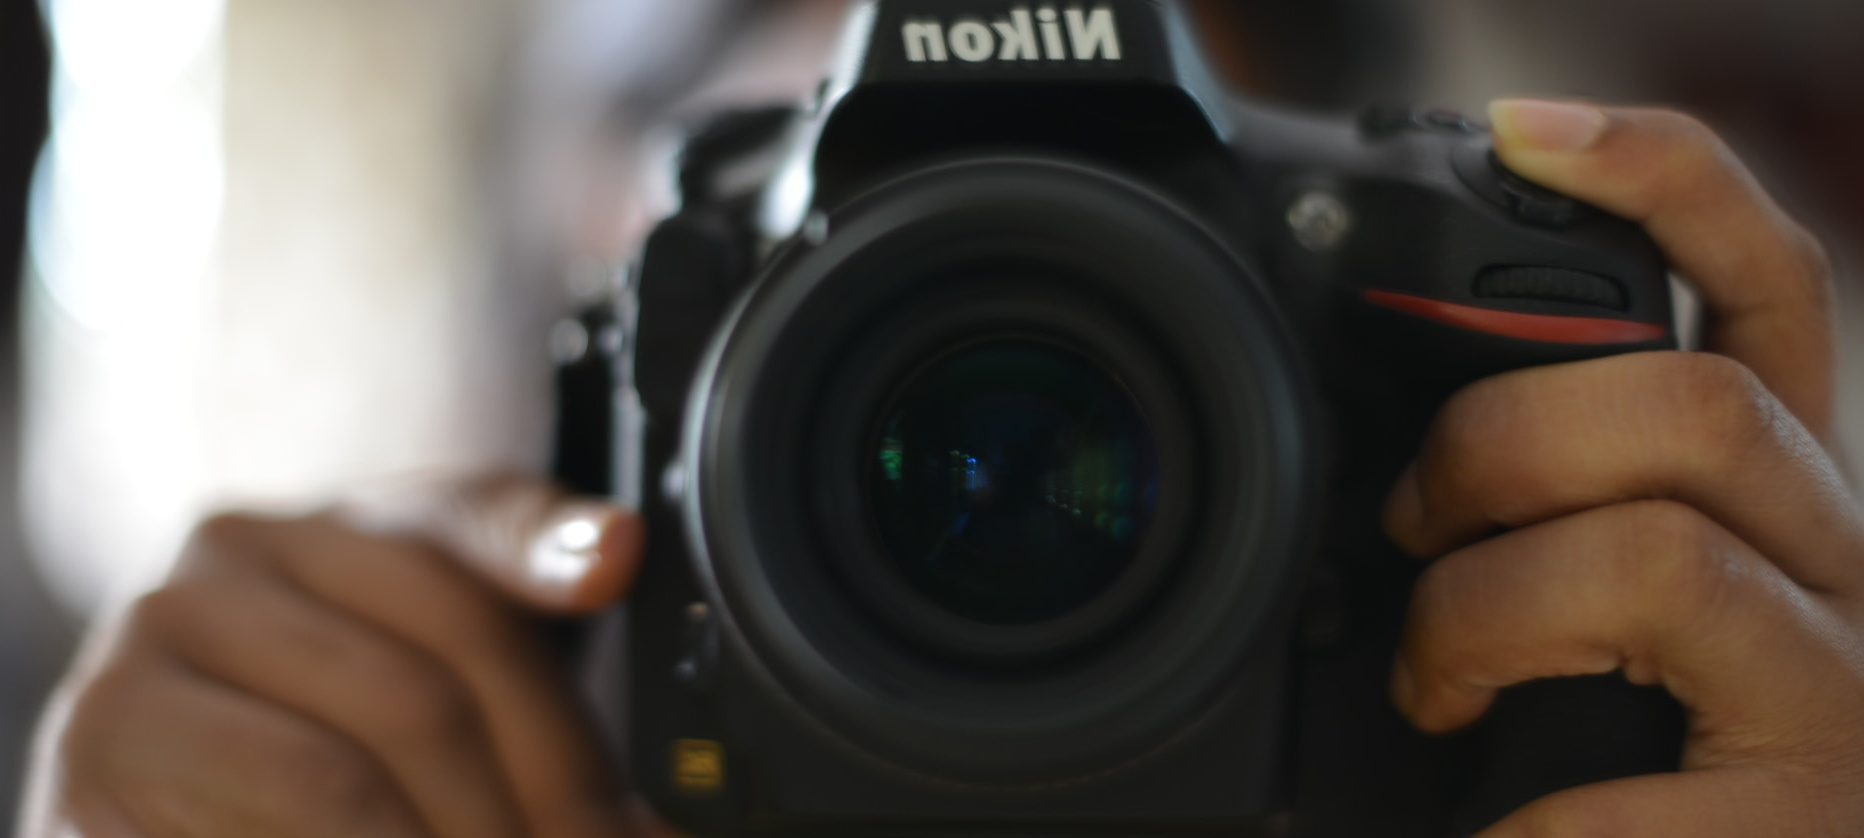 A nikon camera in center frame pointing at the camera